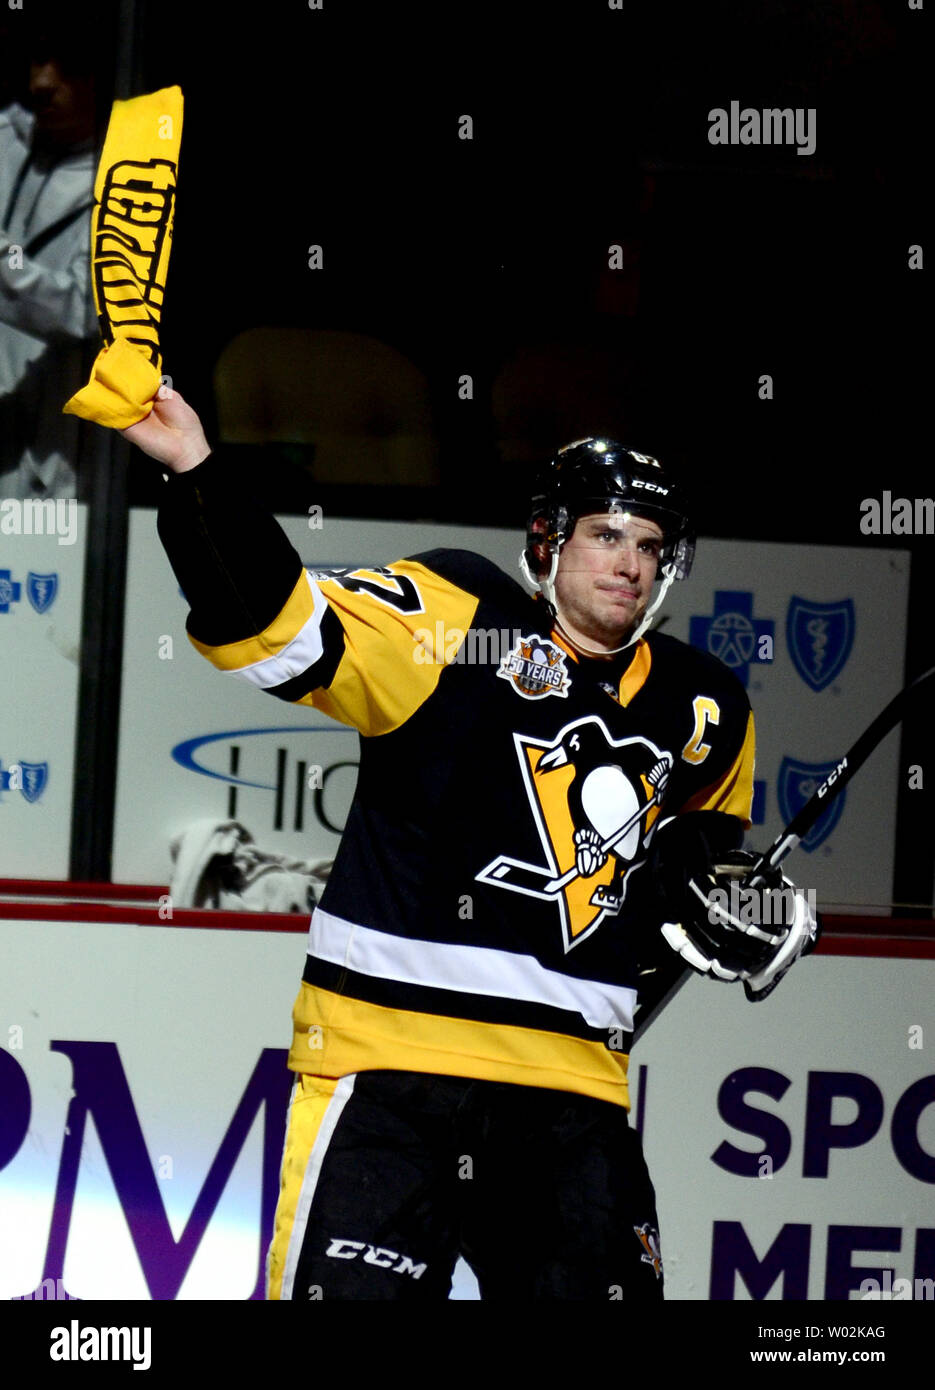 Pittsburgh Penguins center Sidney Crosby (87) waves a Terrible Towel in  support of the Pittsburgh Steelers following the Penguins 5-1 win against  the Boston Bruins at the PPG Paints Arena in Pittsburgh